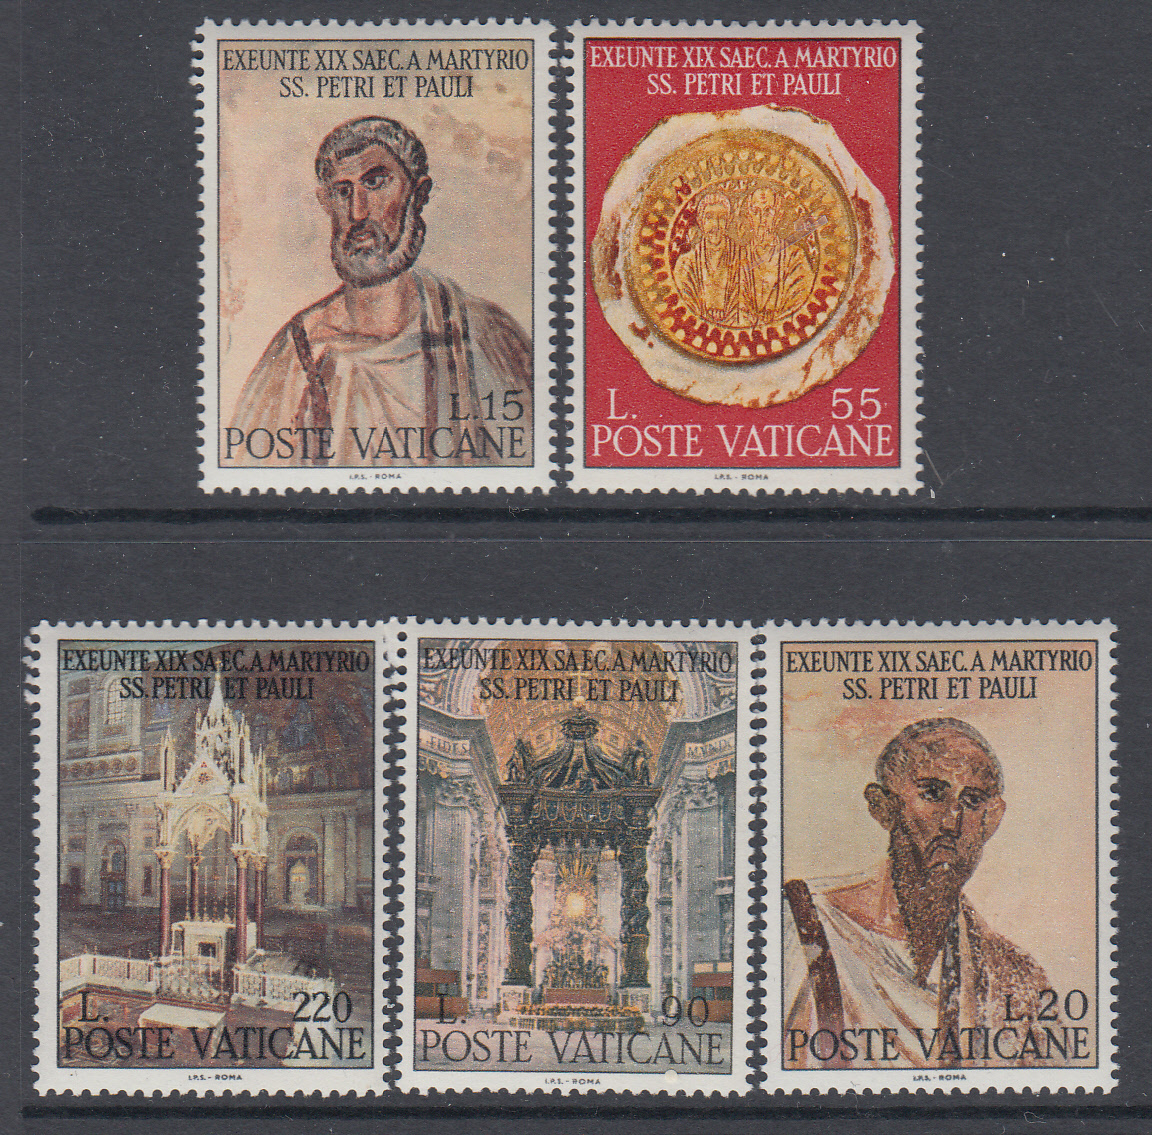 Saints Peter and Paul Set of 5 Vatican Postage Stamps Catalog Number